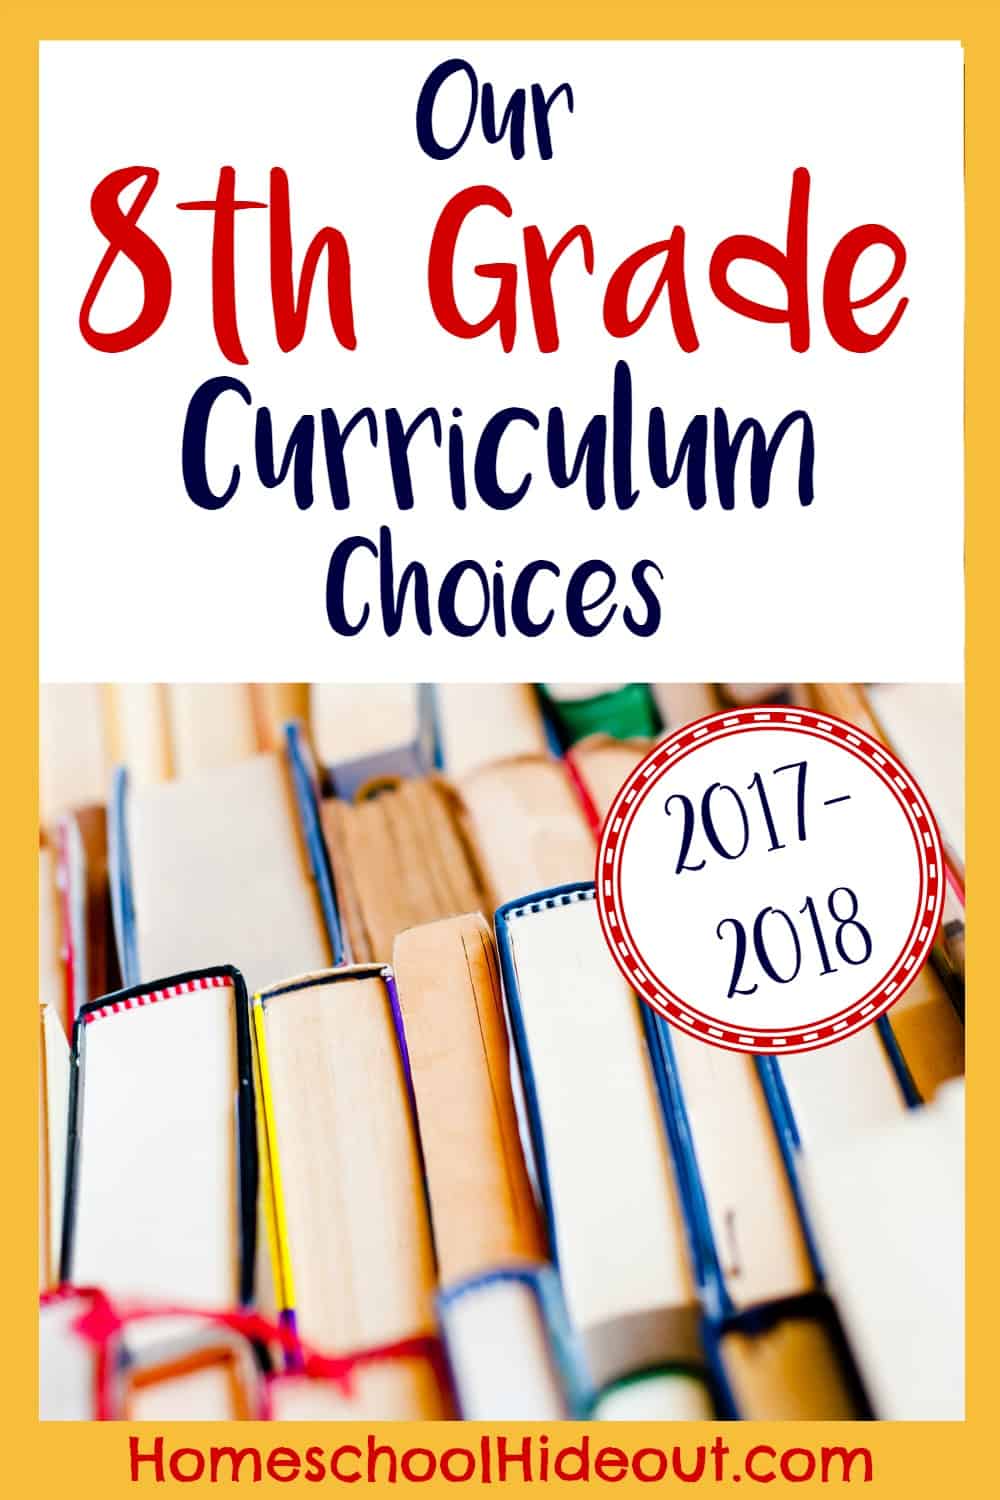 Check out our 2017-2018 8th grade curriculum choices! Relax and enjoy the ride.